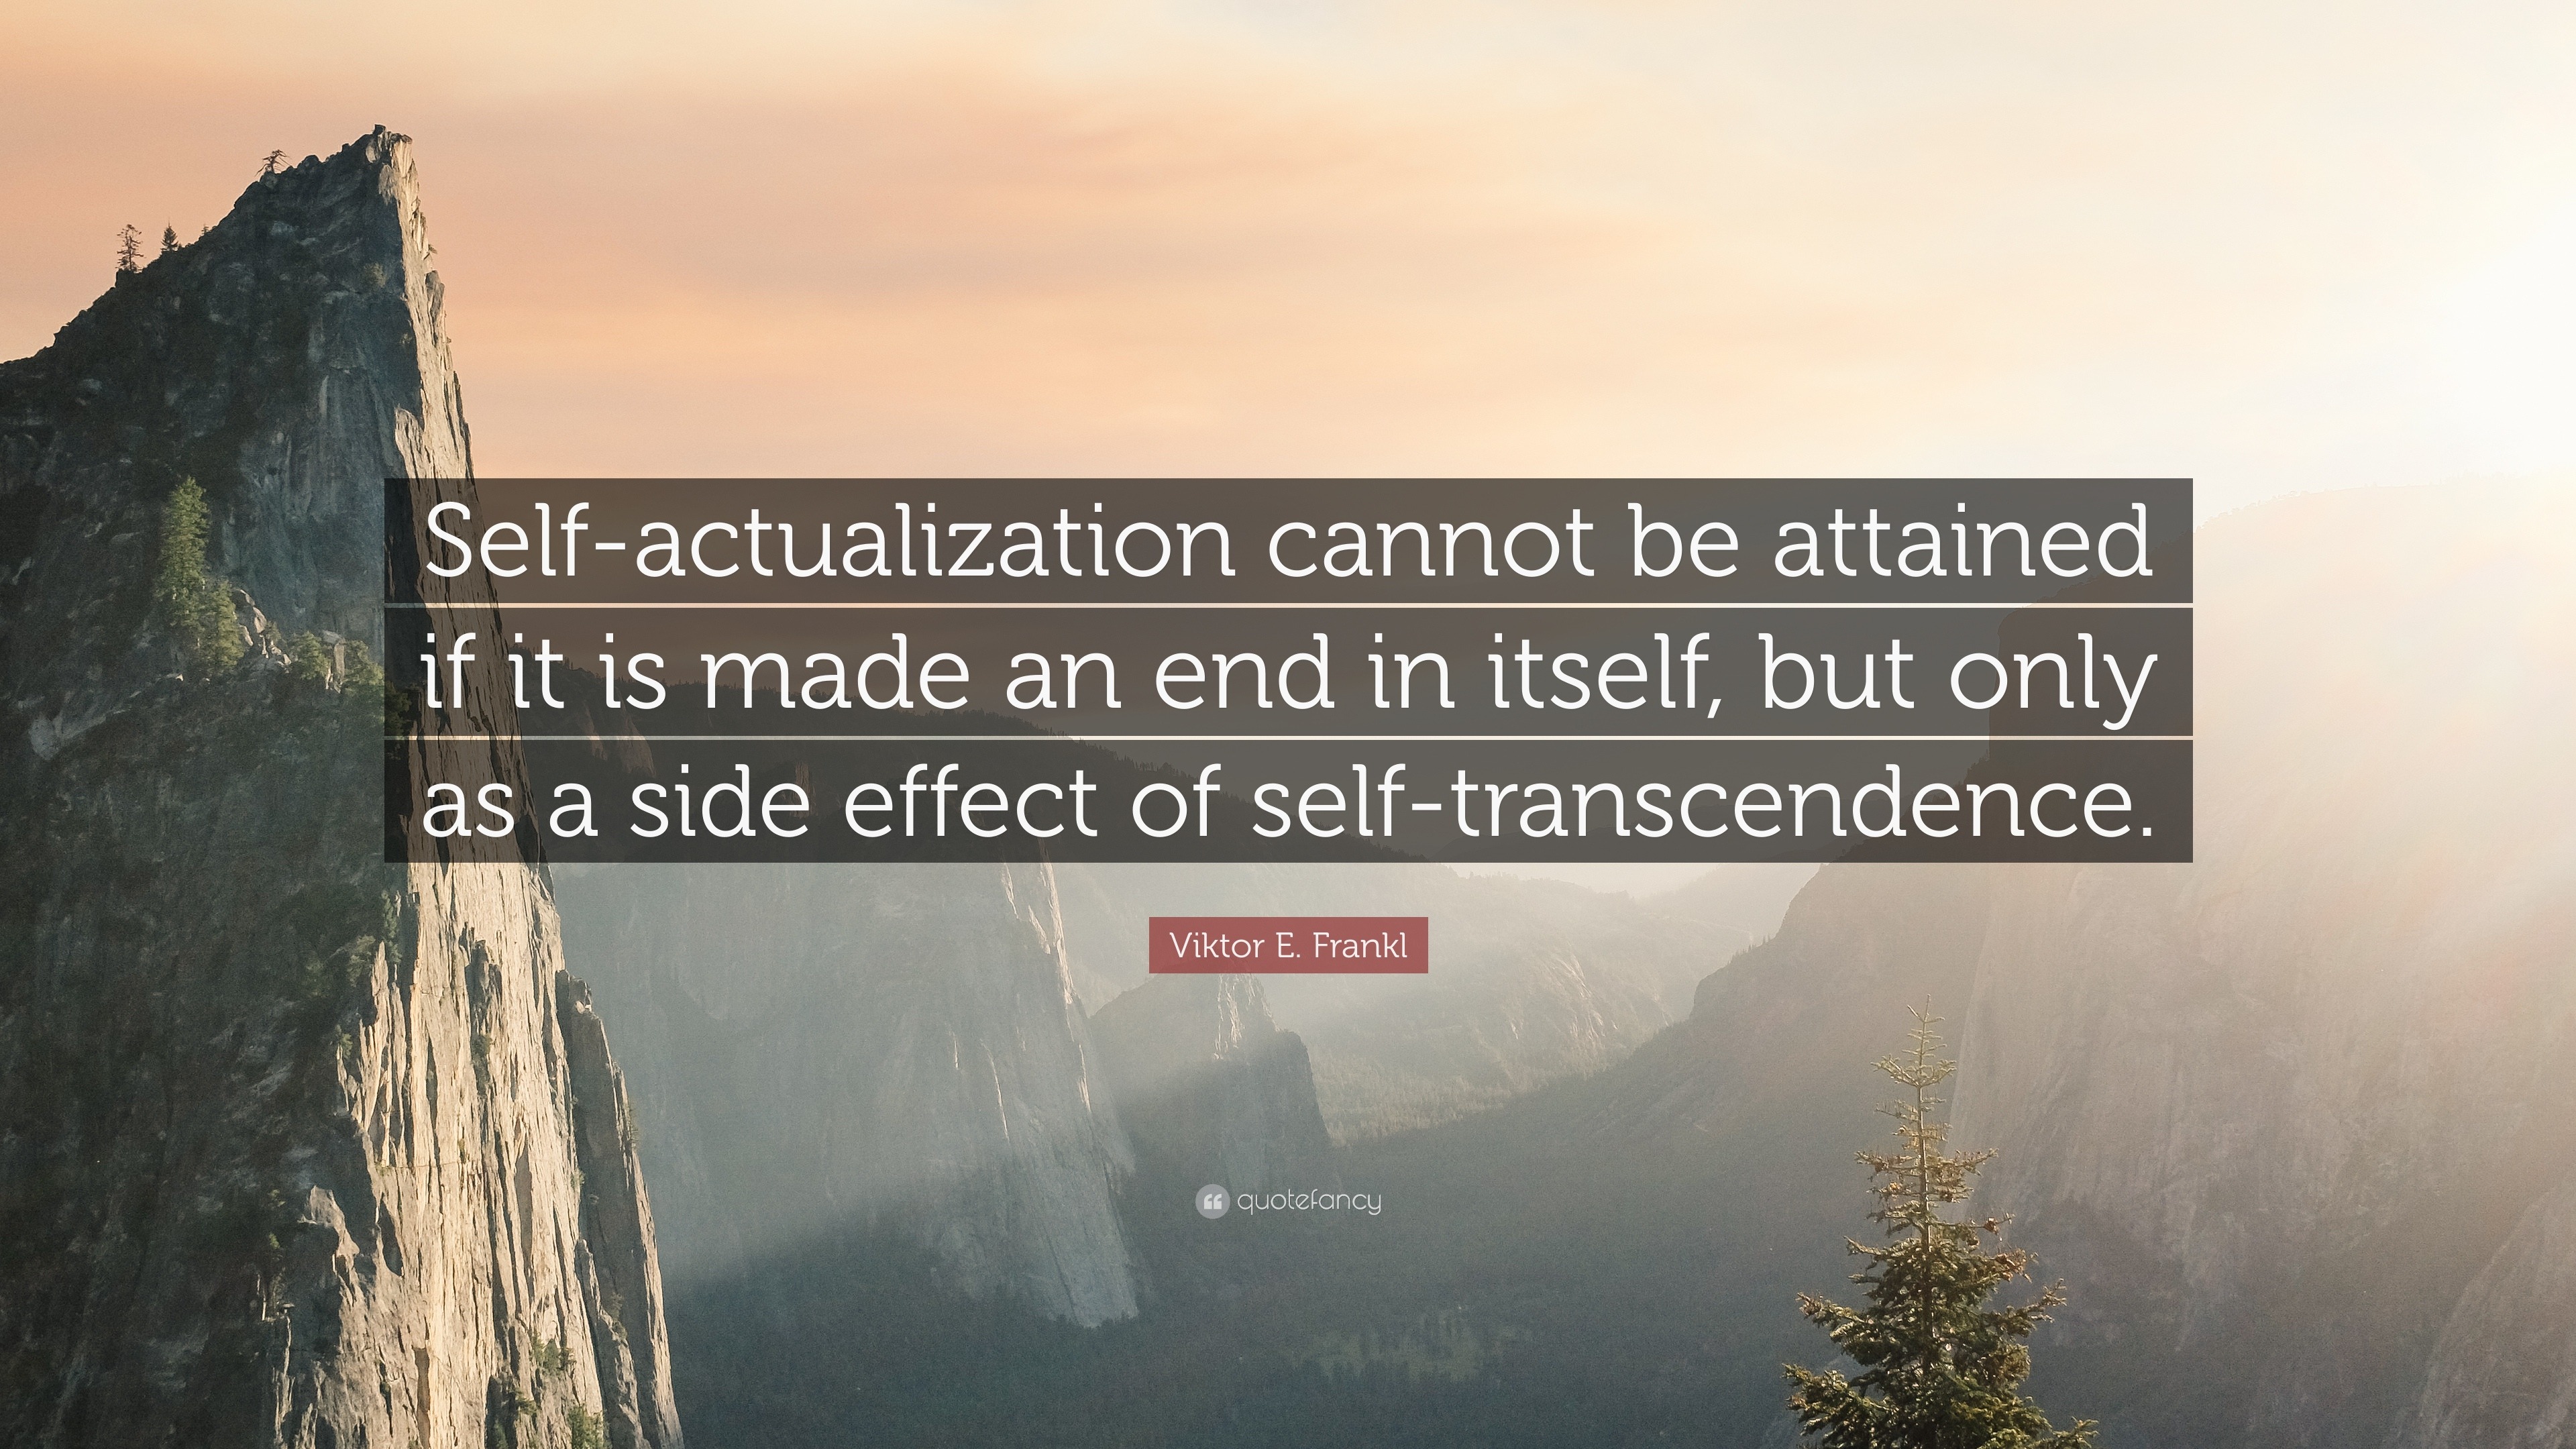 Viktor E. Frankl Quote: “Self-actualization cannot be attained if it is  made an end in